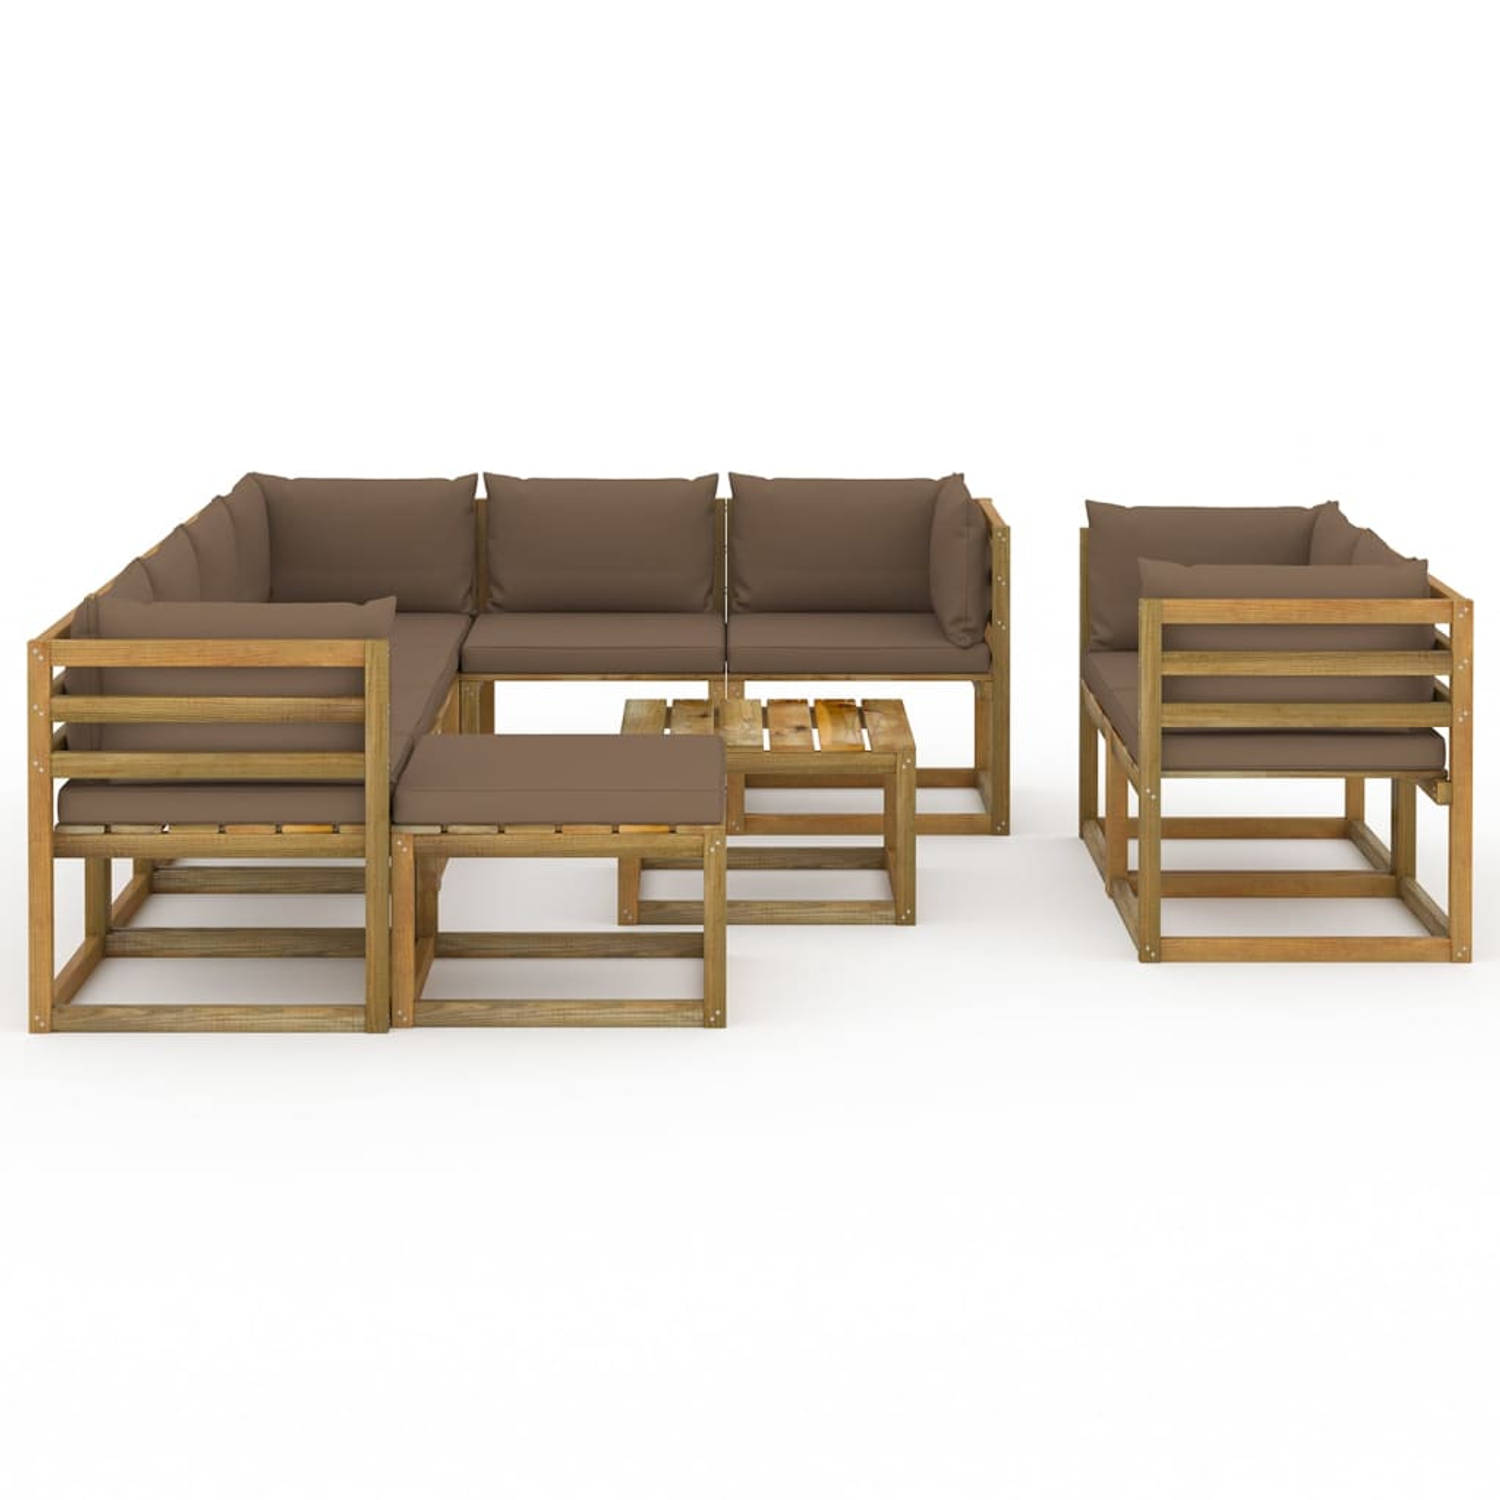 The Living Store 10-delige Loungeset met taupe kussens - Tuinset